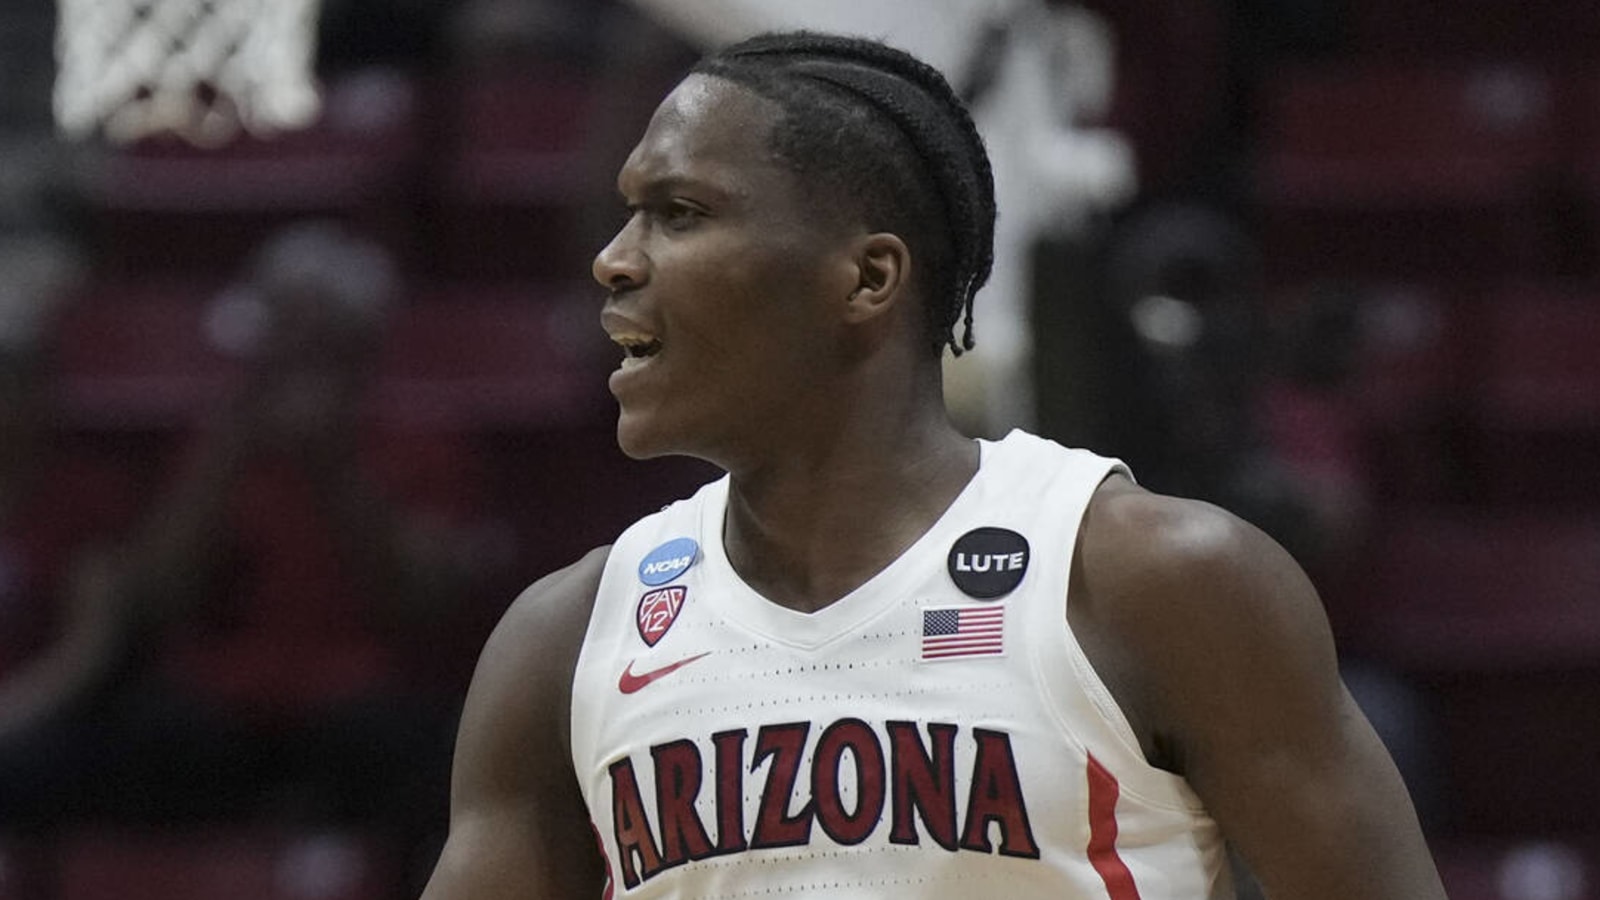 Arizona's Bennedict Mathurin attempted to apologize after possible contact with TCU dancer